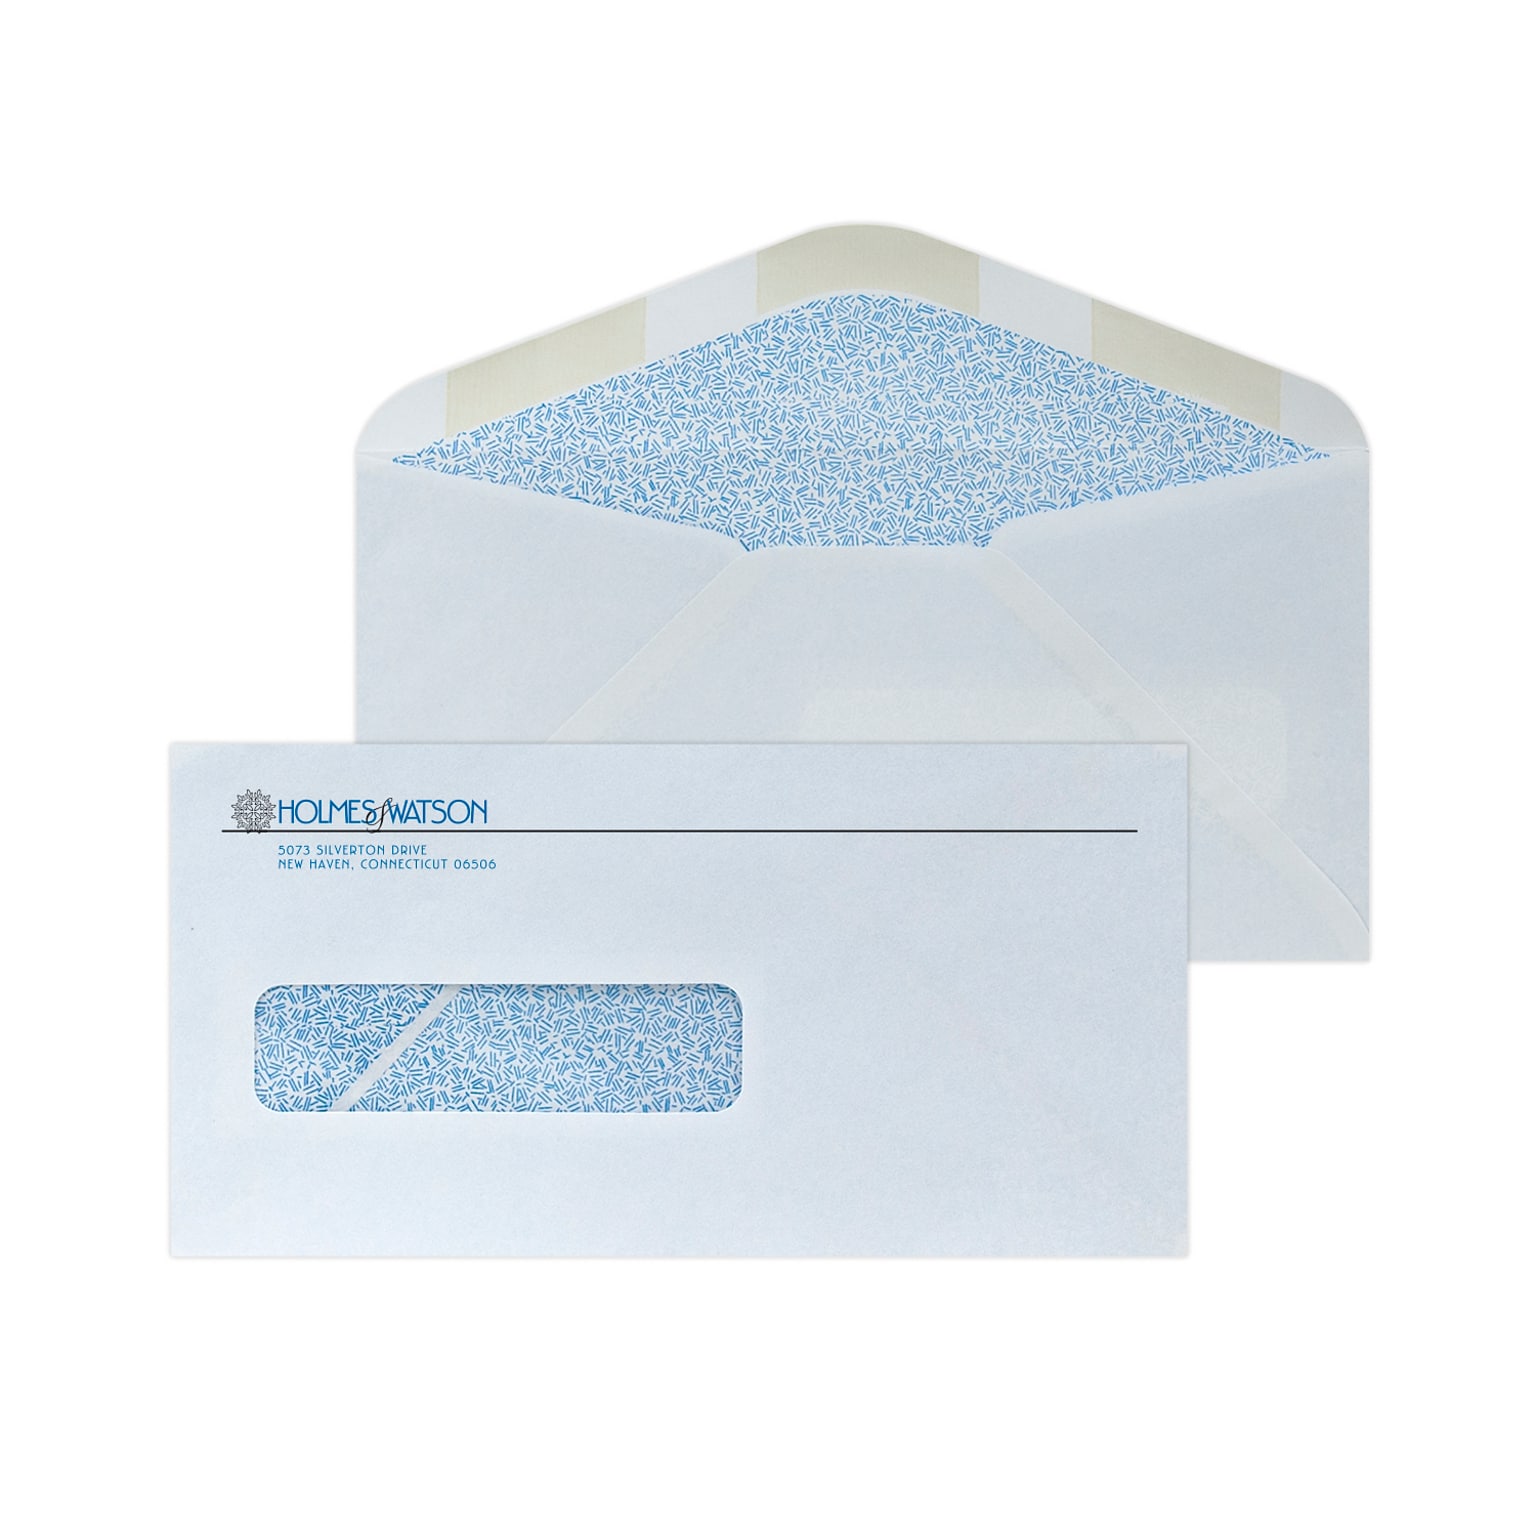 Custom 4-1/2 x 9 Insurance Claim Left Window Envelopes with Security Tint, 24# White Wove, 2 Standard Inks, 250 / Pack